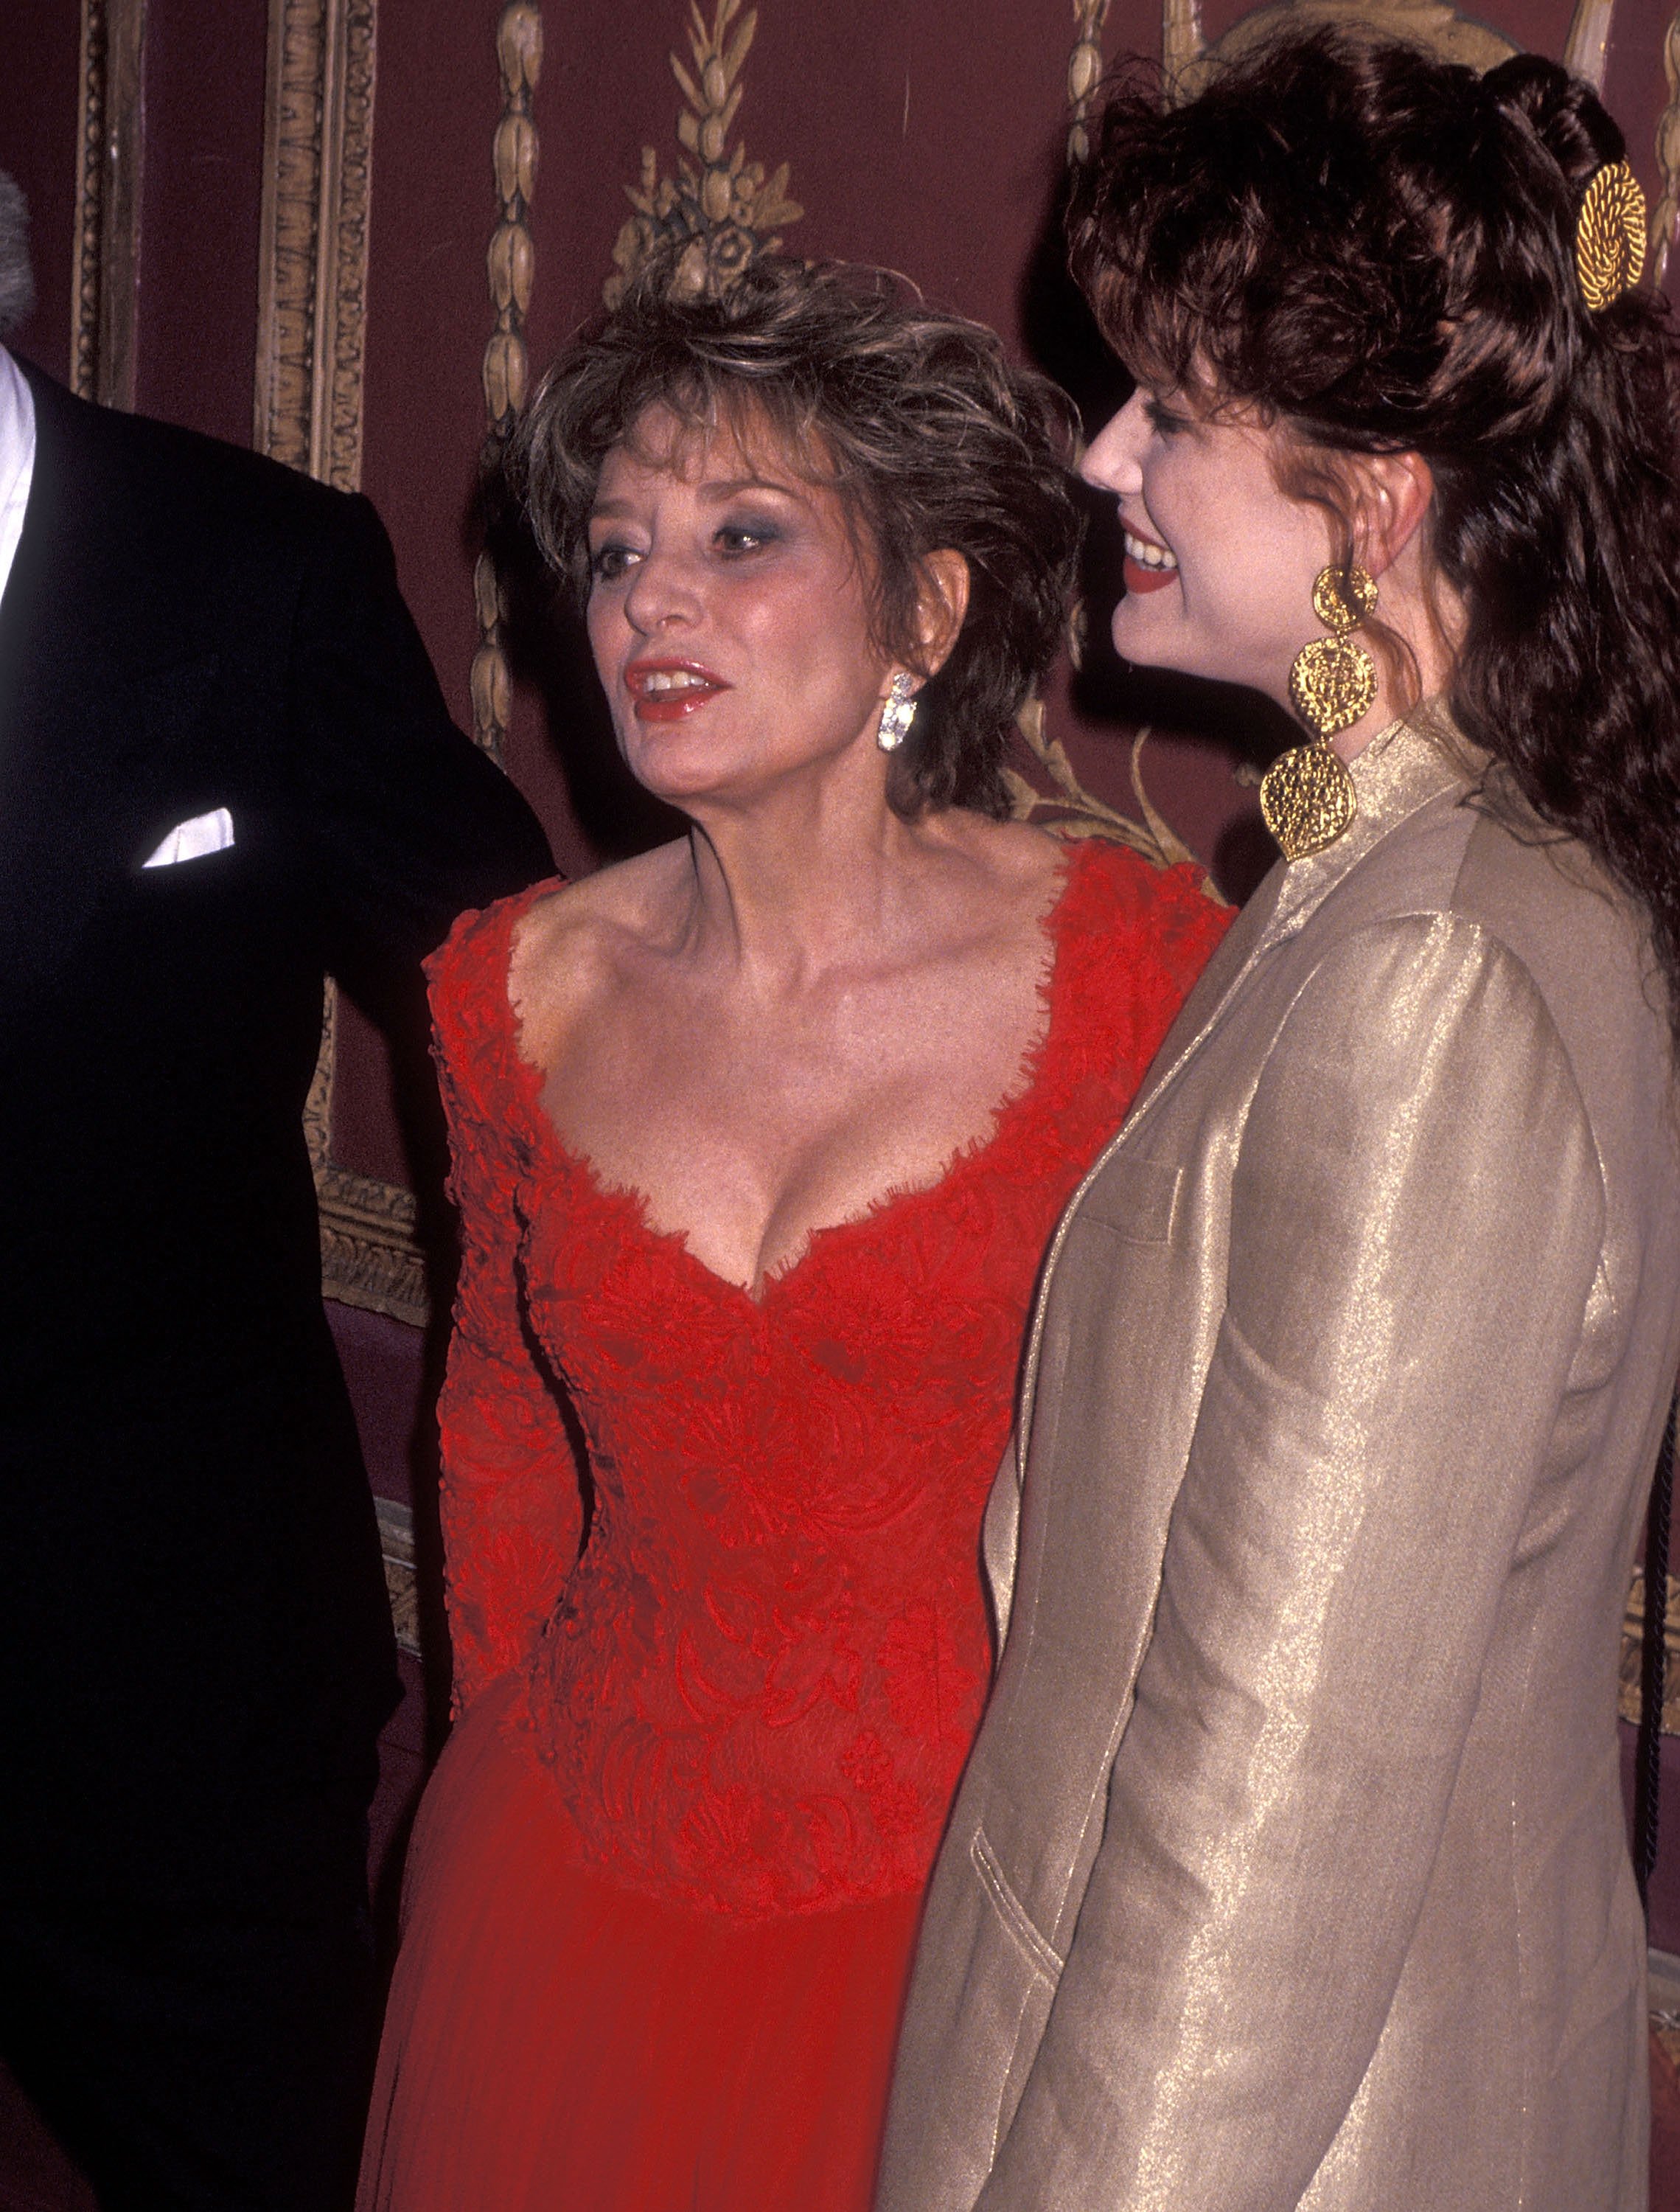 Barbara Walters and daughter Jacqueline Guber attend the American Museum of the Moving Image Salute to Barbara Walters on March 19, 1992, at the Waldorf-Astoria Hotel in New York City. | Source: Getty Images